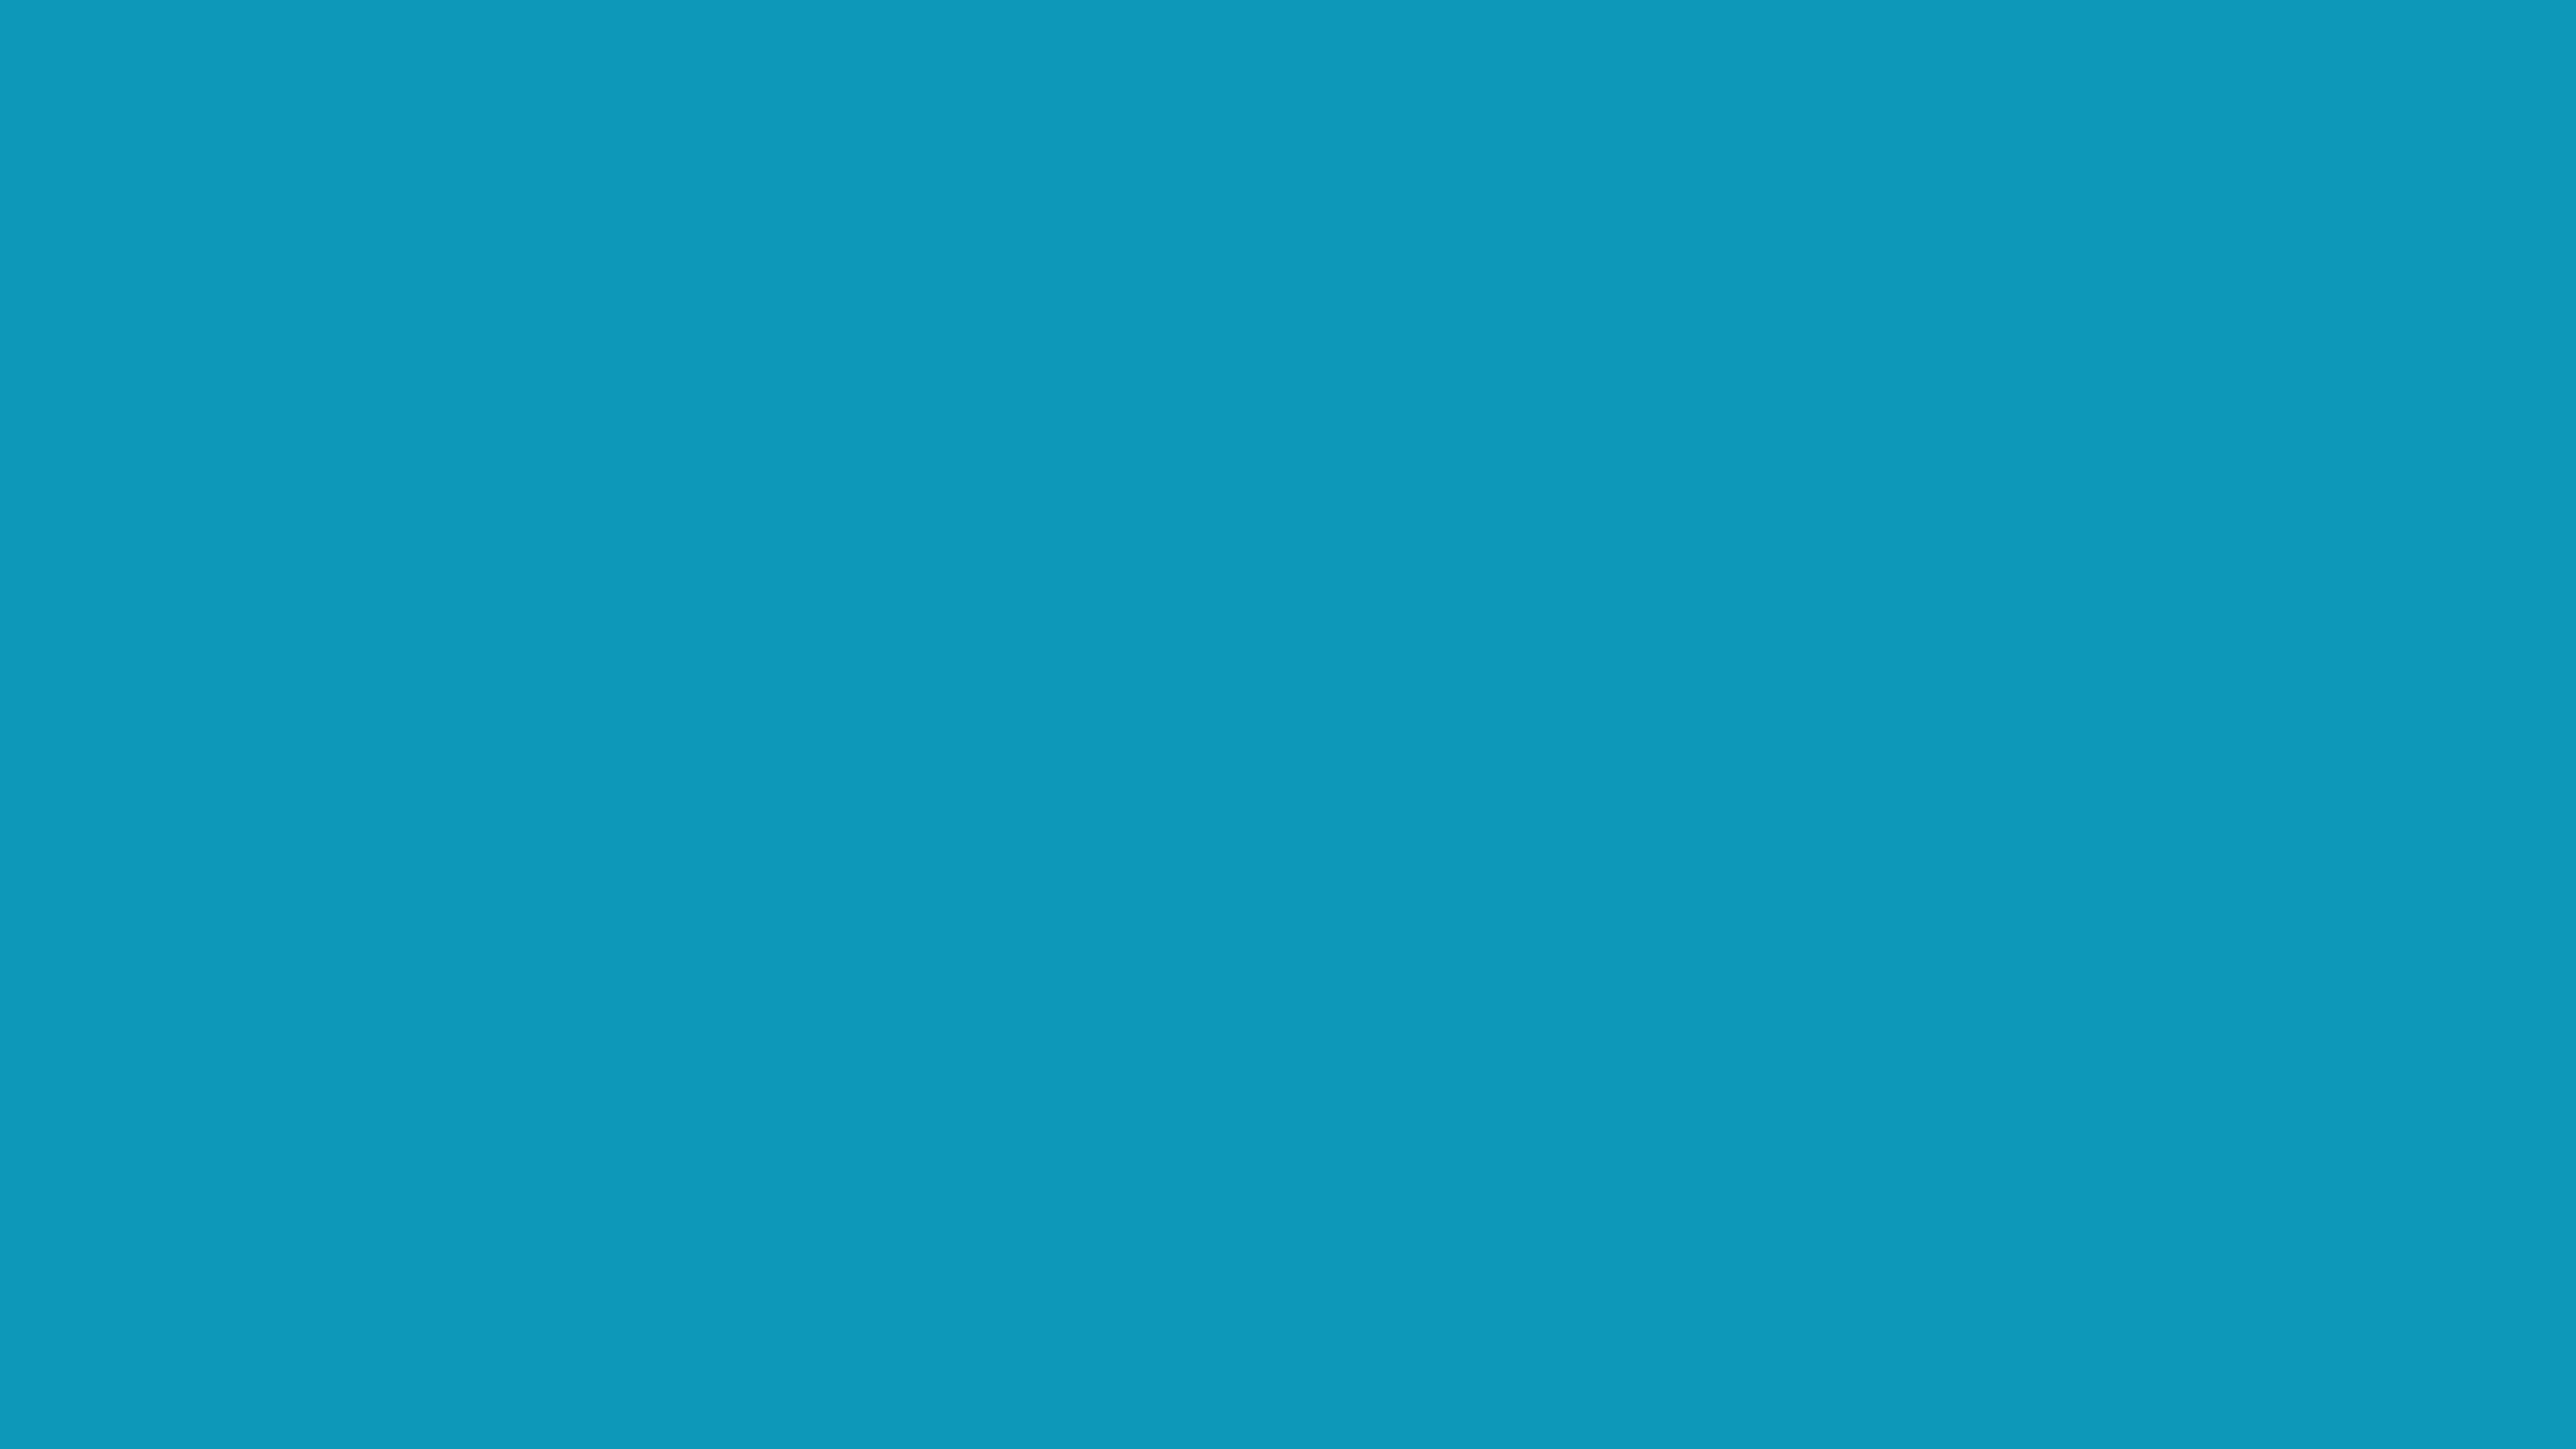 5120x2880 Blue-green Solid Color Background